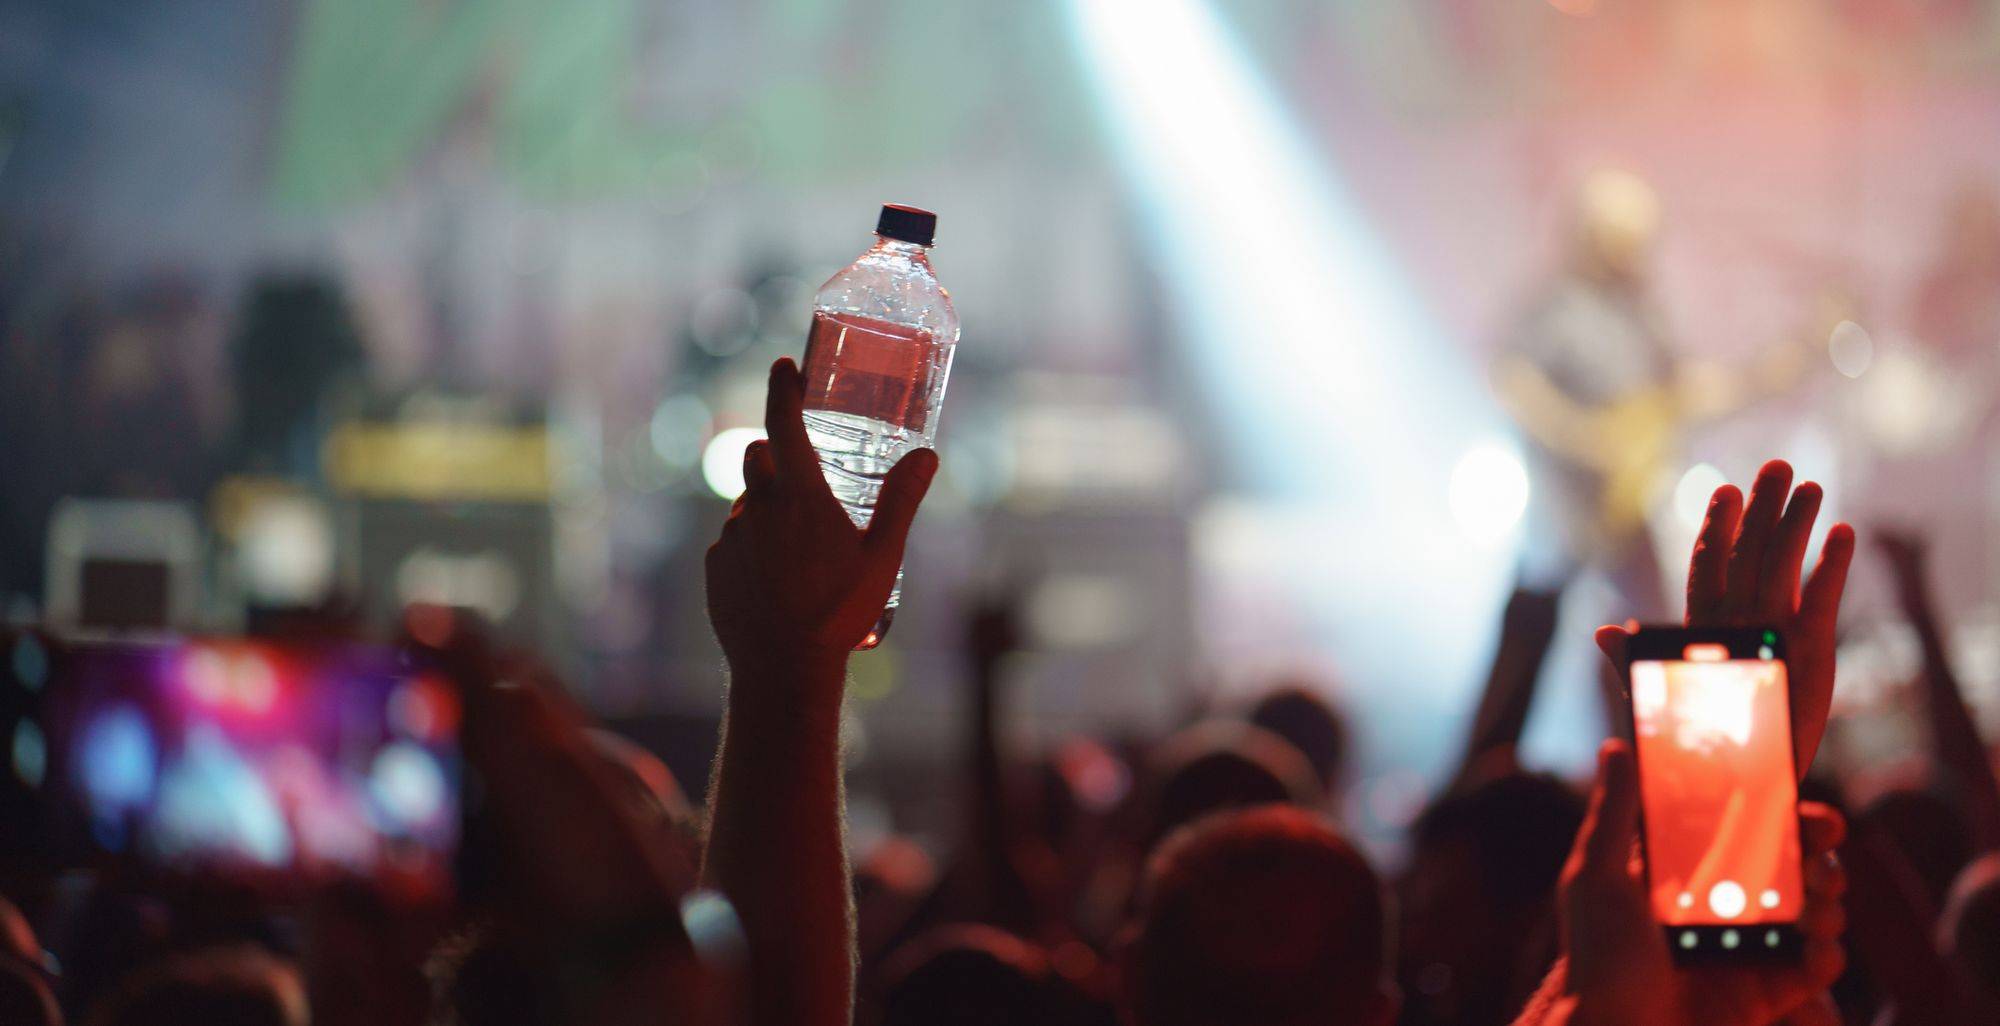 A closeup of a hand holding up a water bottle in a busy crowd at a concert.